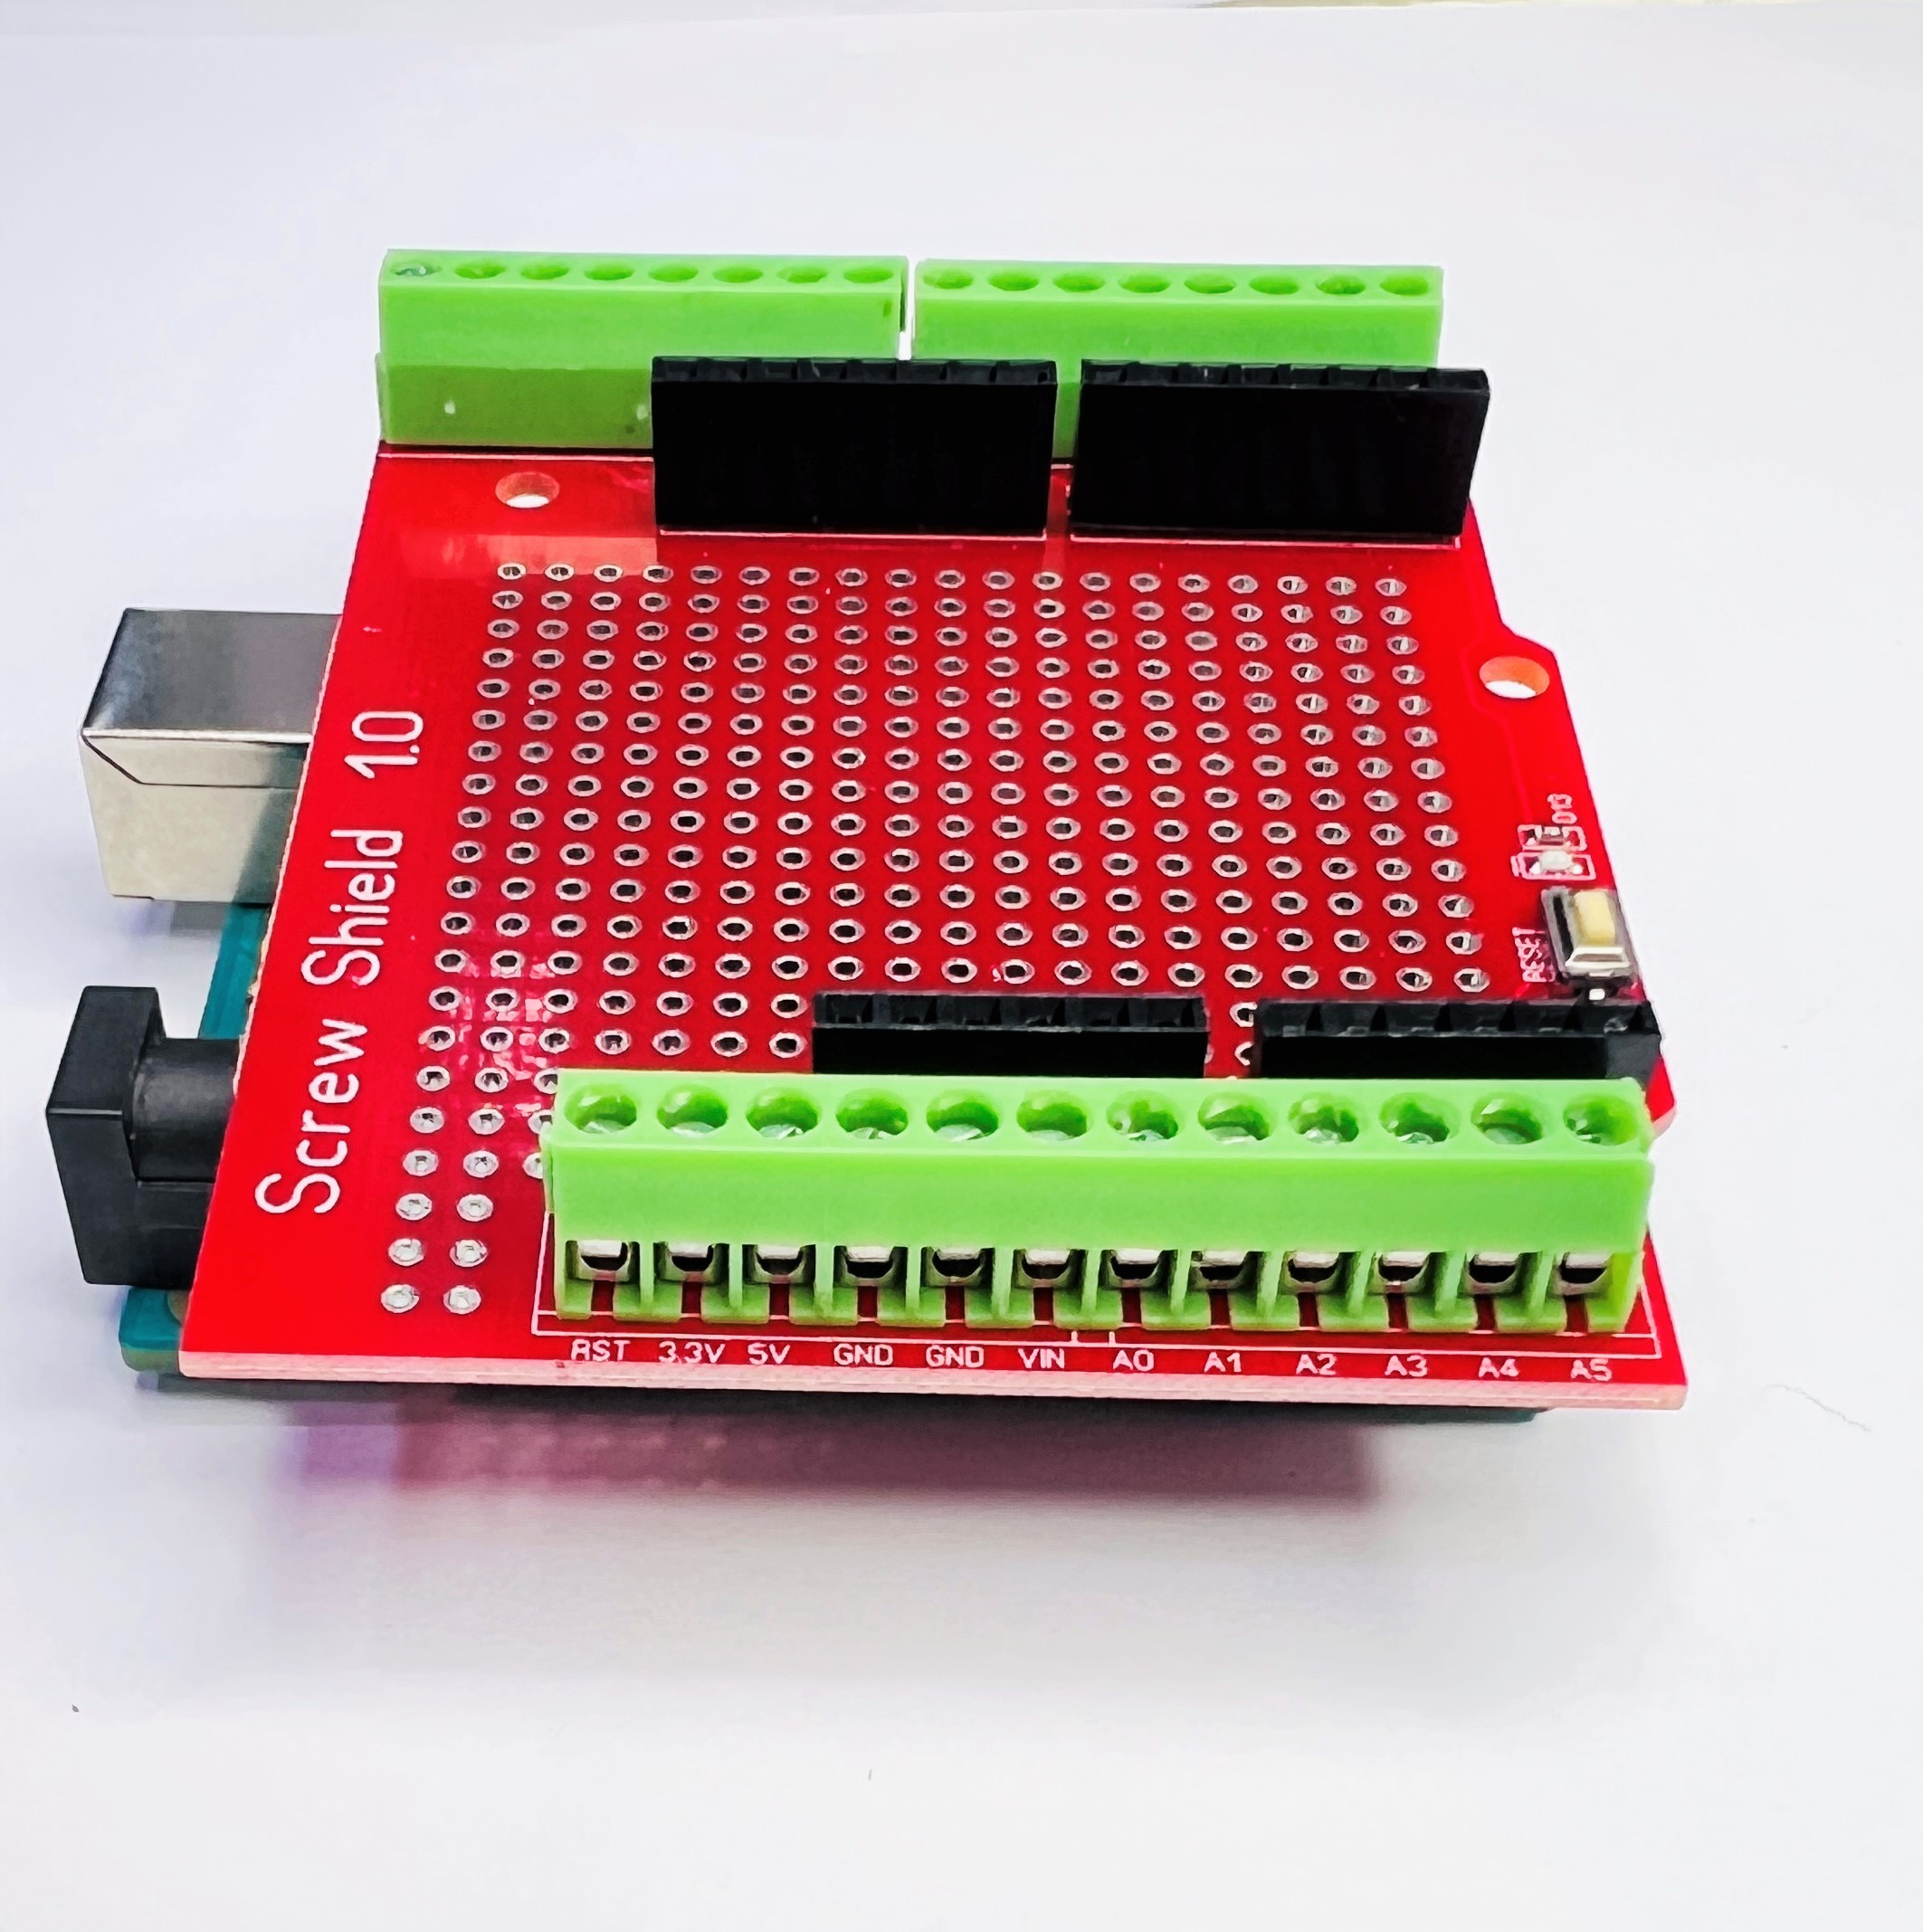 Proto Screw Shield Assembled Terminal Block Prototype Expansion Board for Arduino Uno